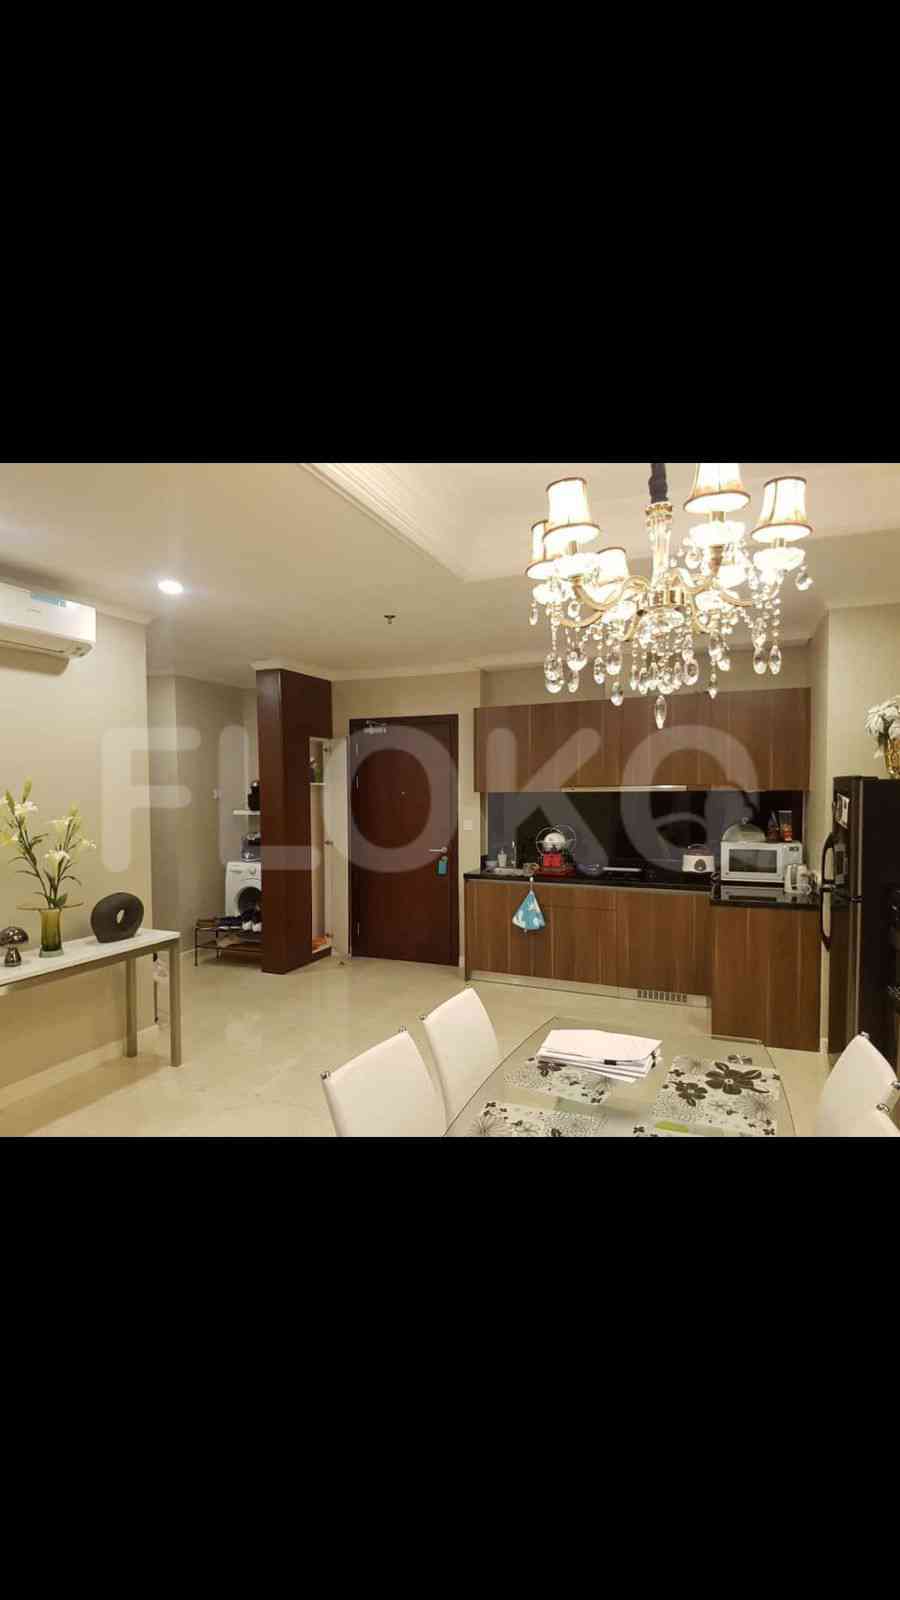 2 Bedroom on 26th Floor for Rent in Lavanue Apartment - fpafa4 8